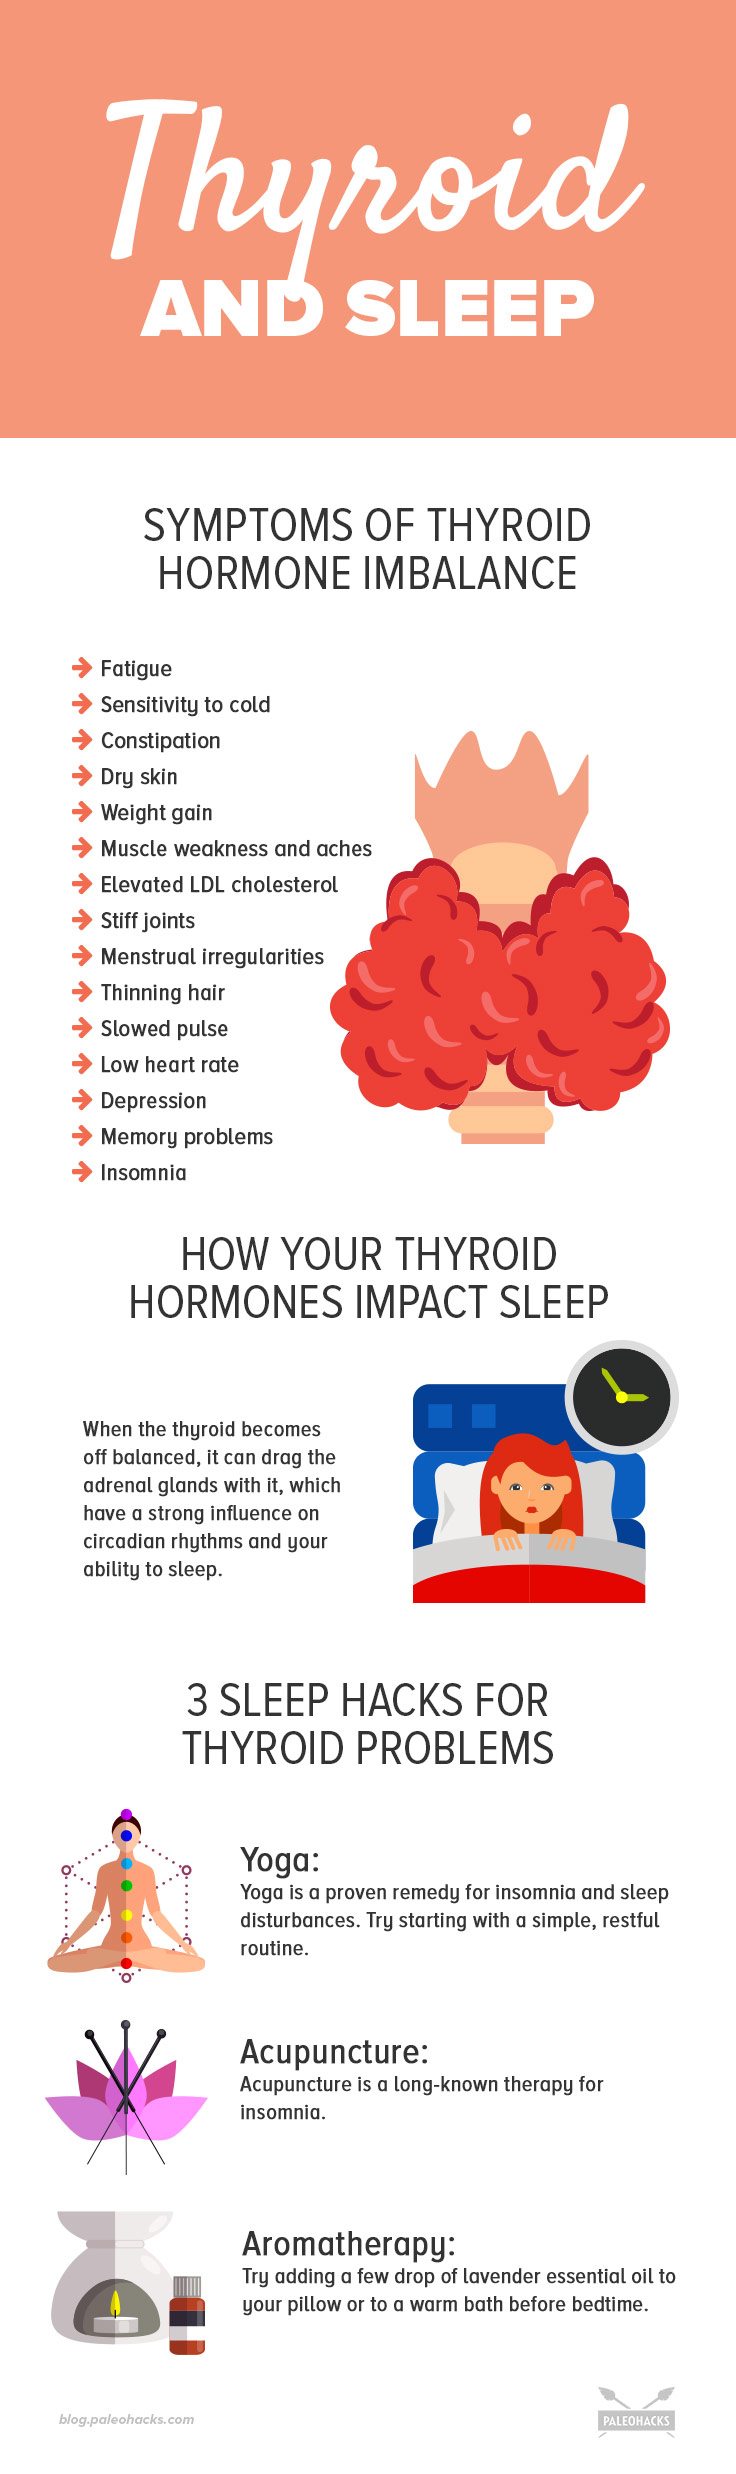 When you’re battling thyroid problems, sleep can become elusive. Here are the basics of the thyroid-sleep connection, and how to get better rest.